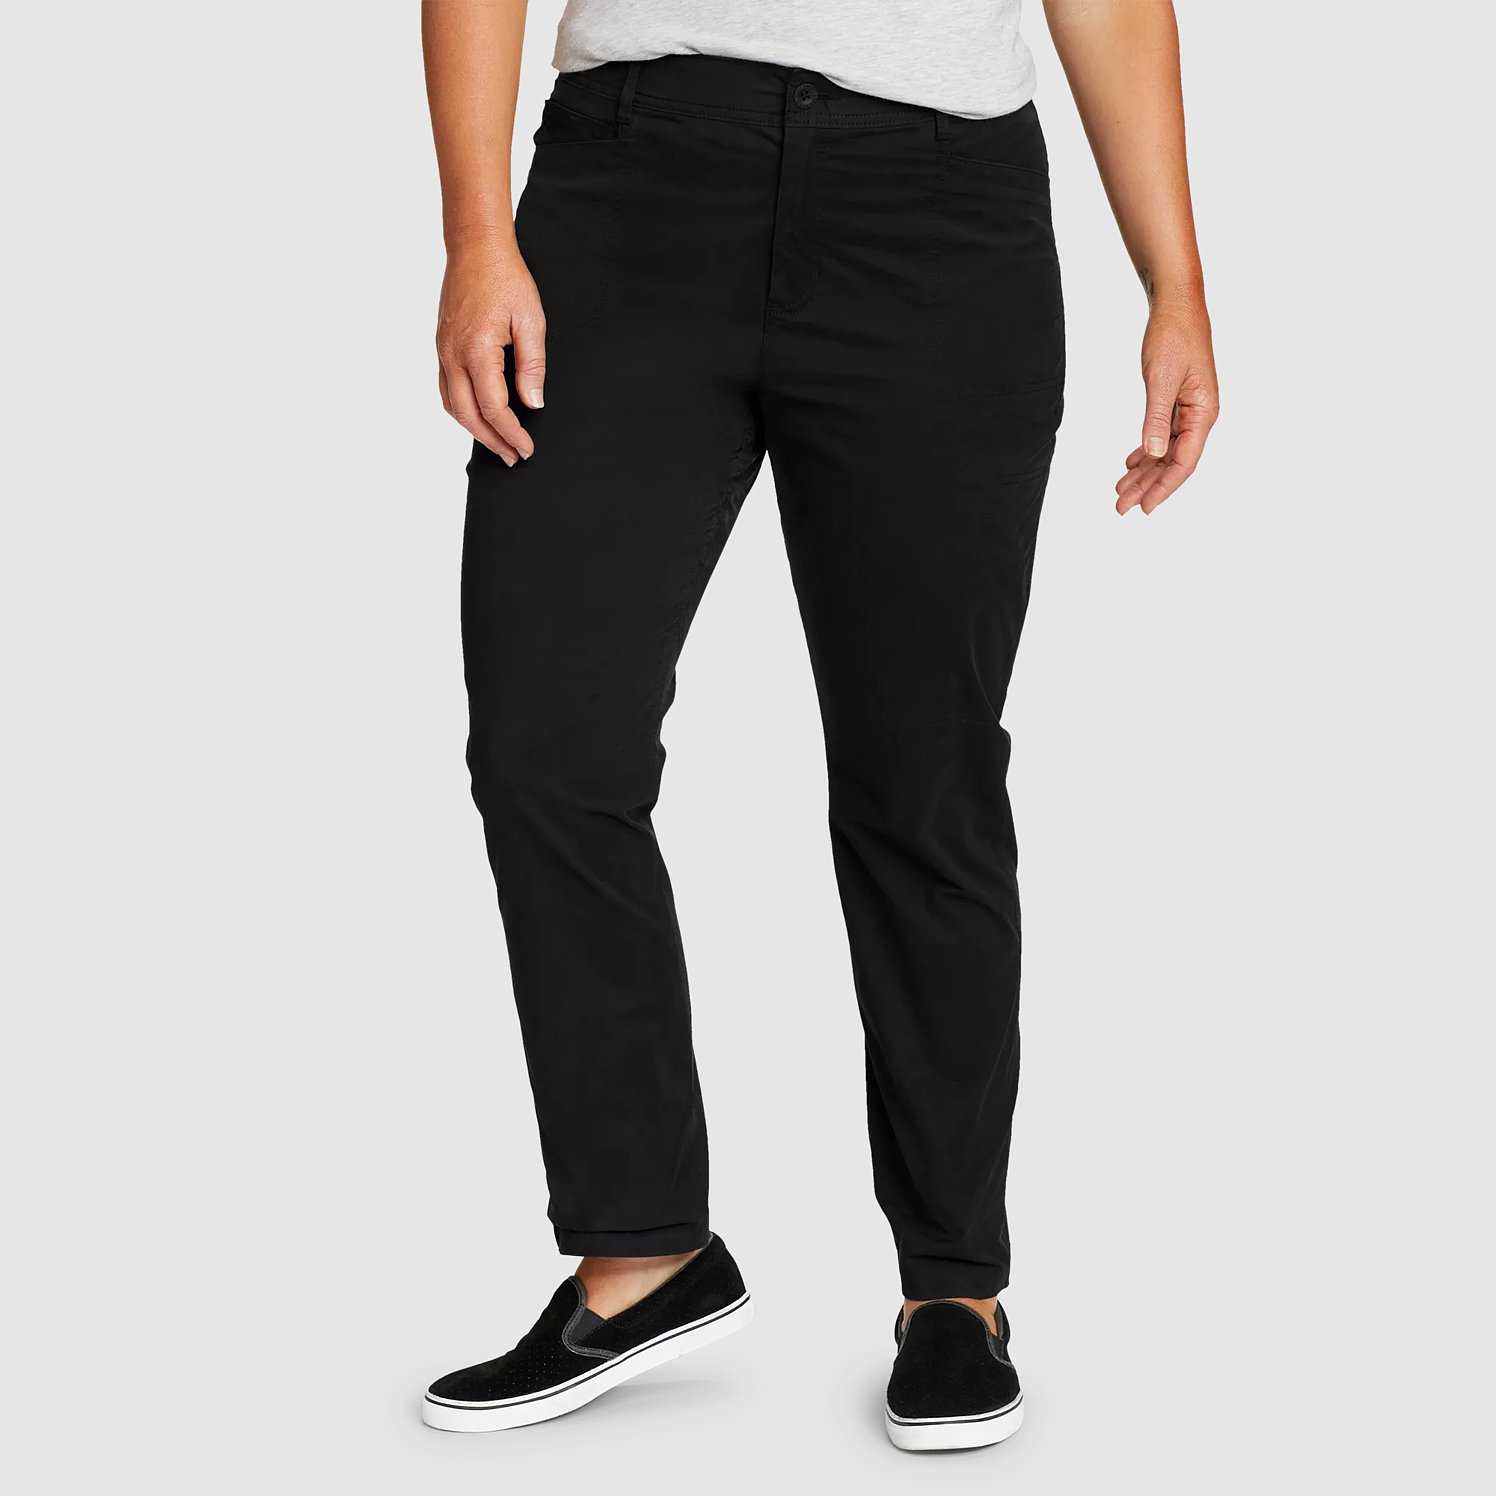 Voyager Cargo Pants - SALE